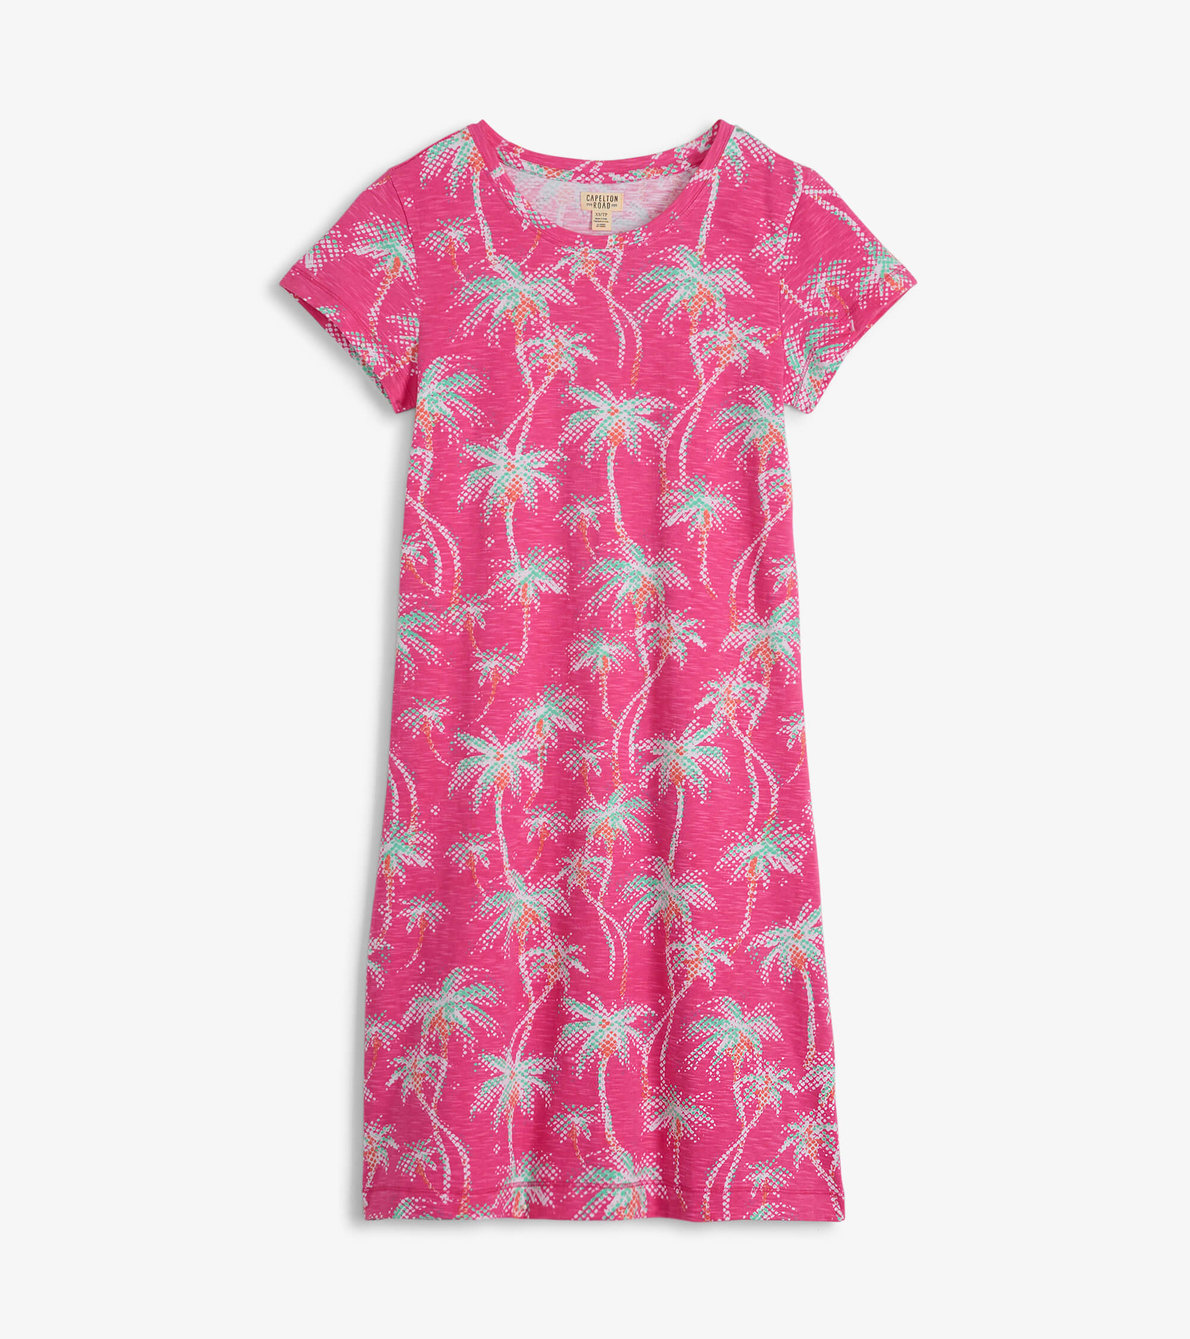 View larger image of Women's Palm Trees Crew Neck T-Shirt Dress